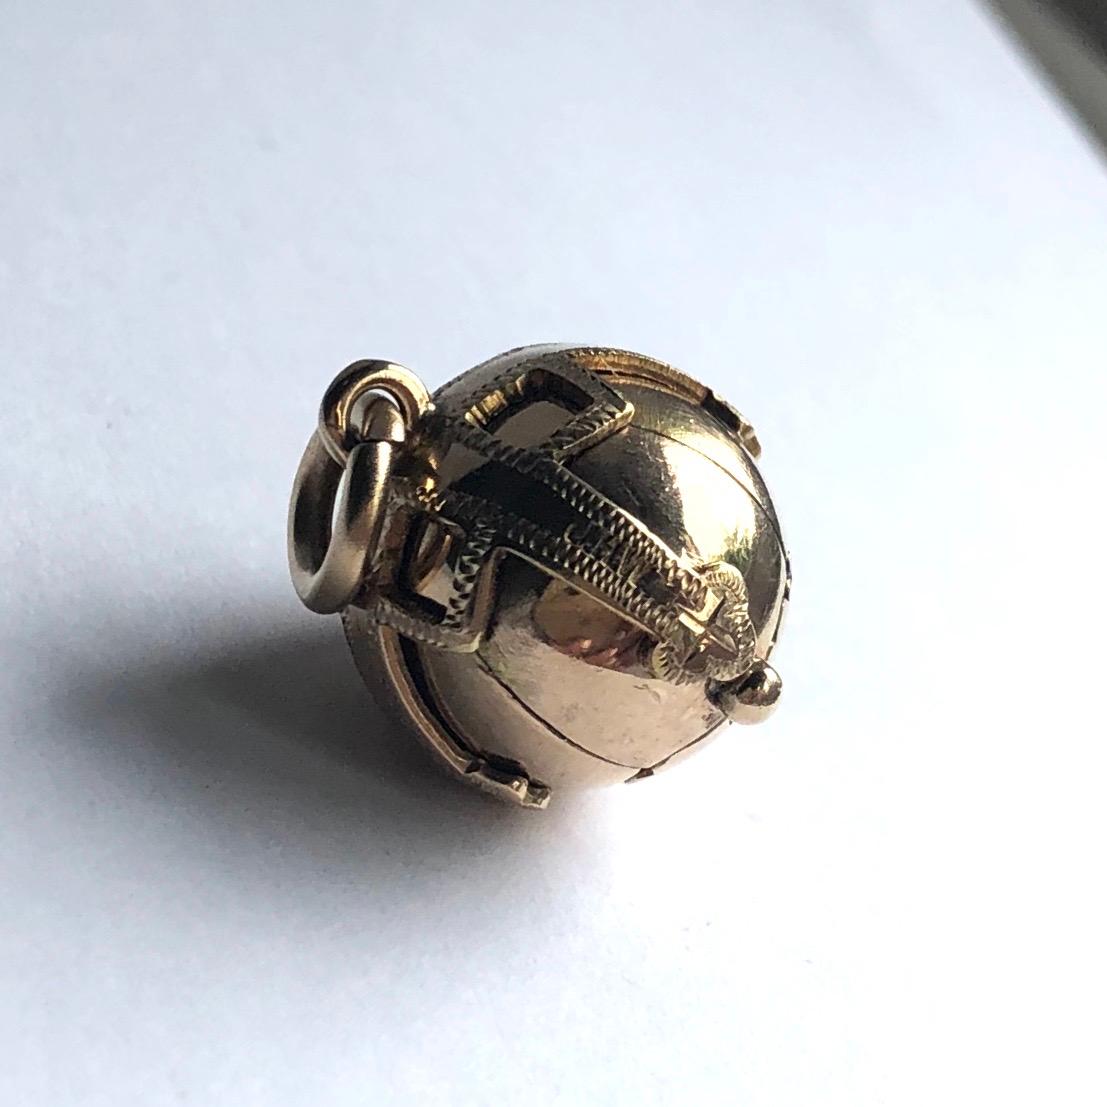 This classic masonic orb is modelled in 9 carat gold with silver underneath to show the engraving. 

Orb Diameter Closed: 15mm 
Orb Dimensions Open: 40x26mm 

Weight: 7.41g